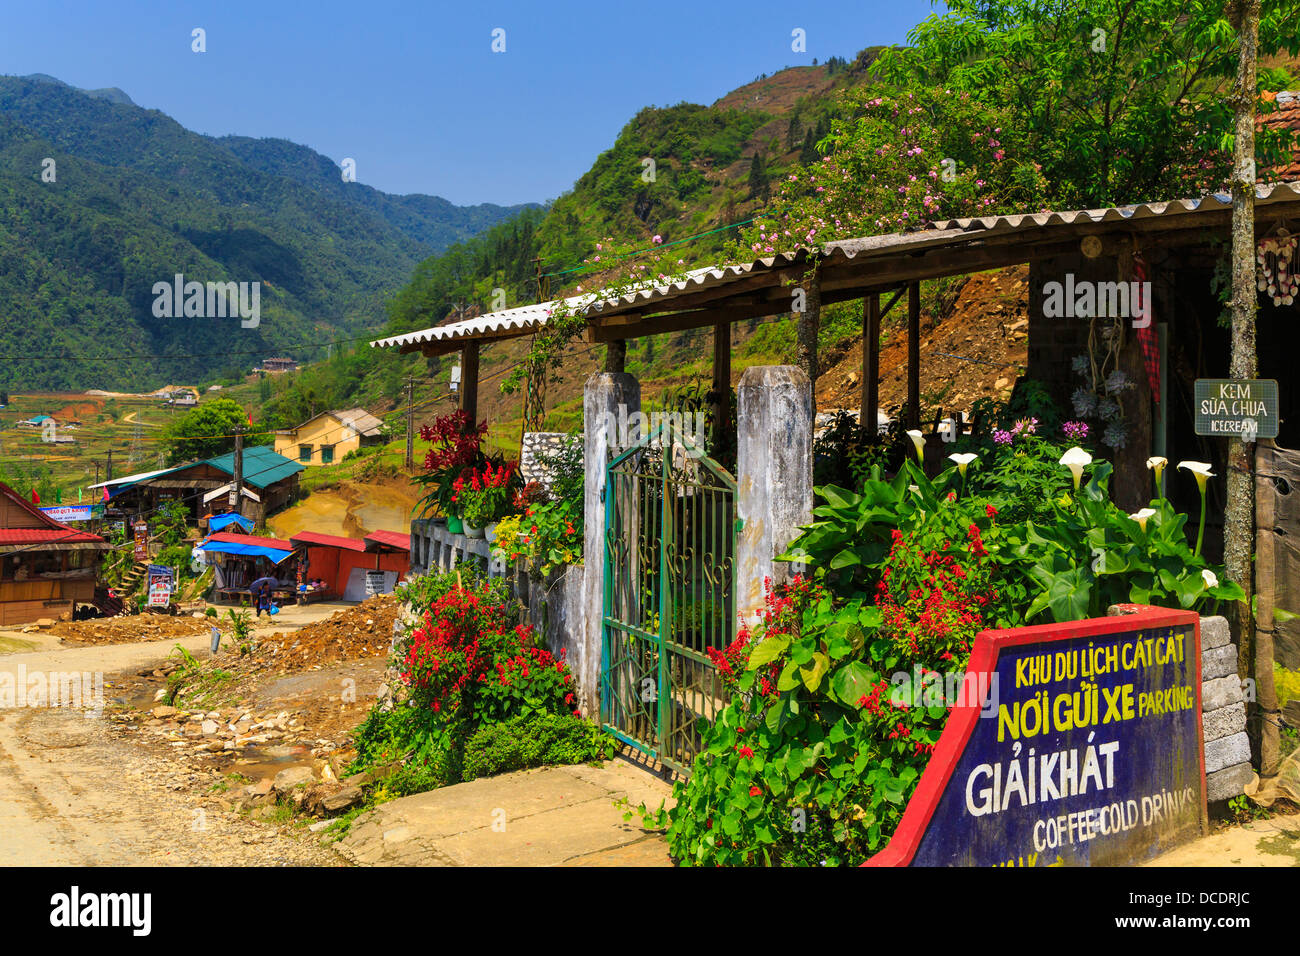 A Cat Cat Village coffee shop in the Muong Hoa valley near Sapa, Vietnam, Asia. Stock Photo